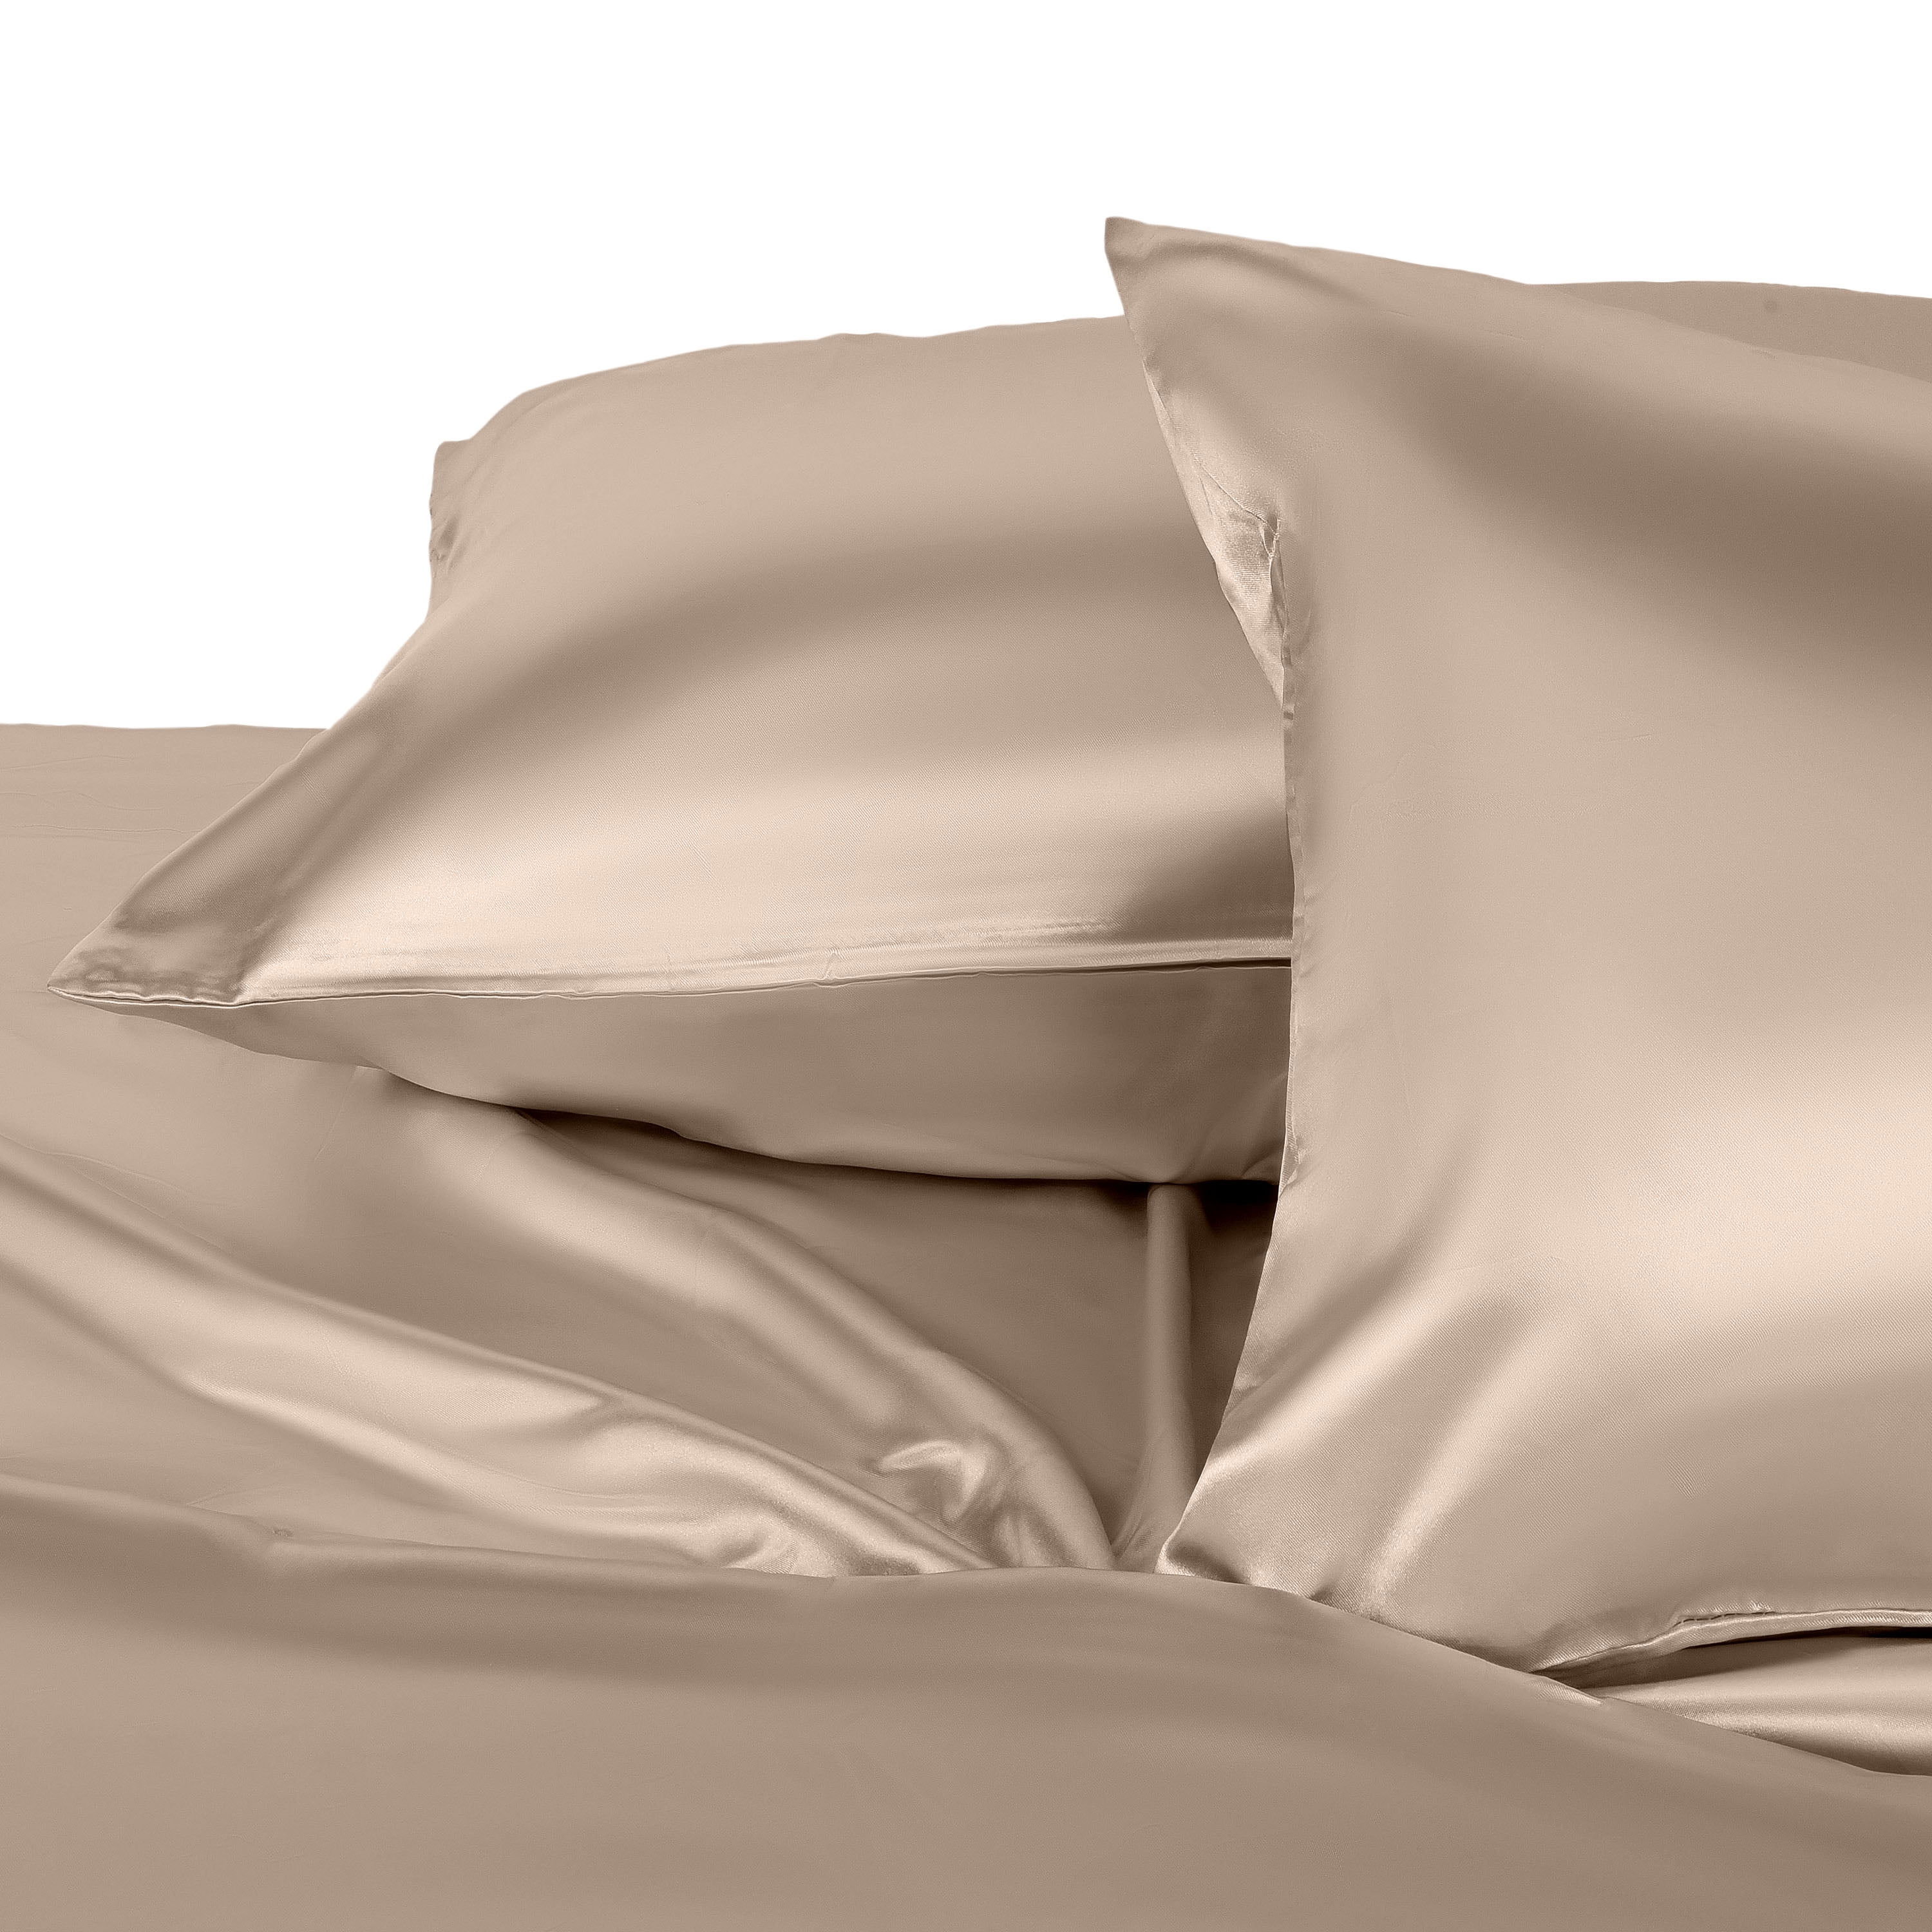 Satin Bed Sheets Queen Sheet Set, Silver Grey Silk Sheets, 4 - Pieces Soft  Bedding Set with 1 Deep P…See more Satin Bed Sheets Queen Sheet Set, Silver